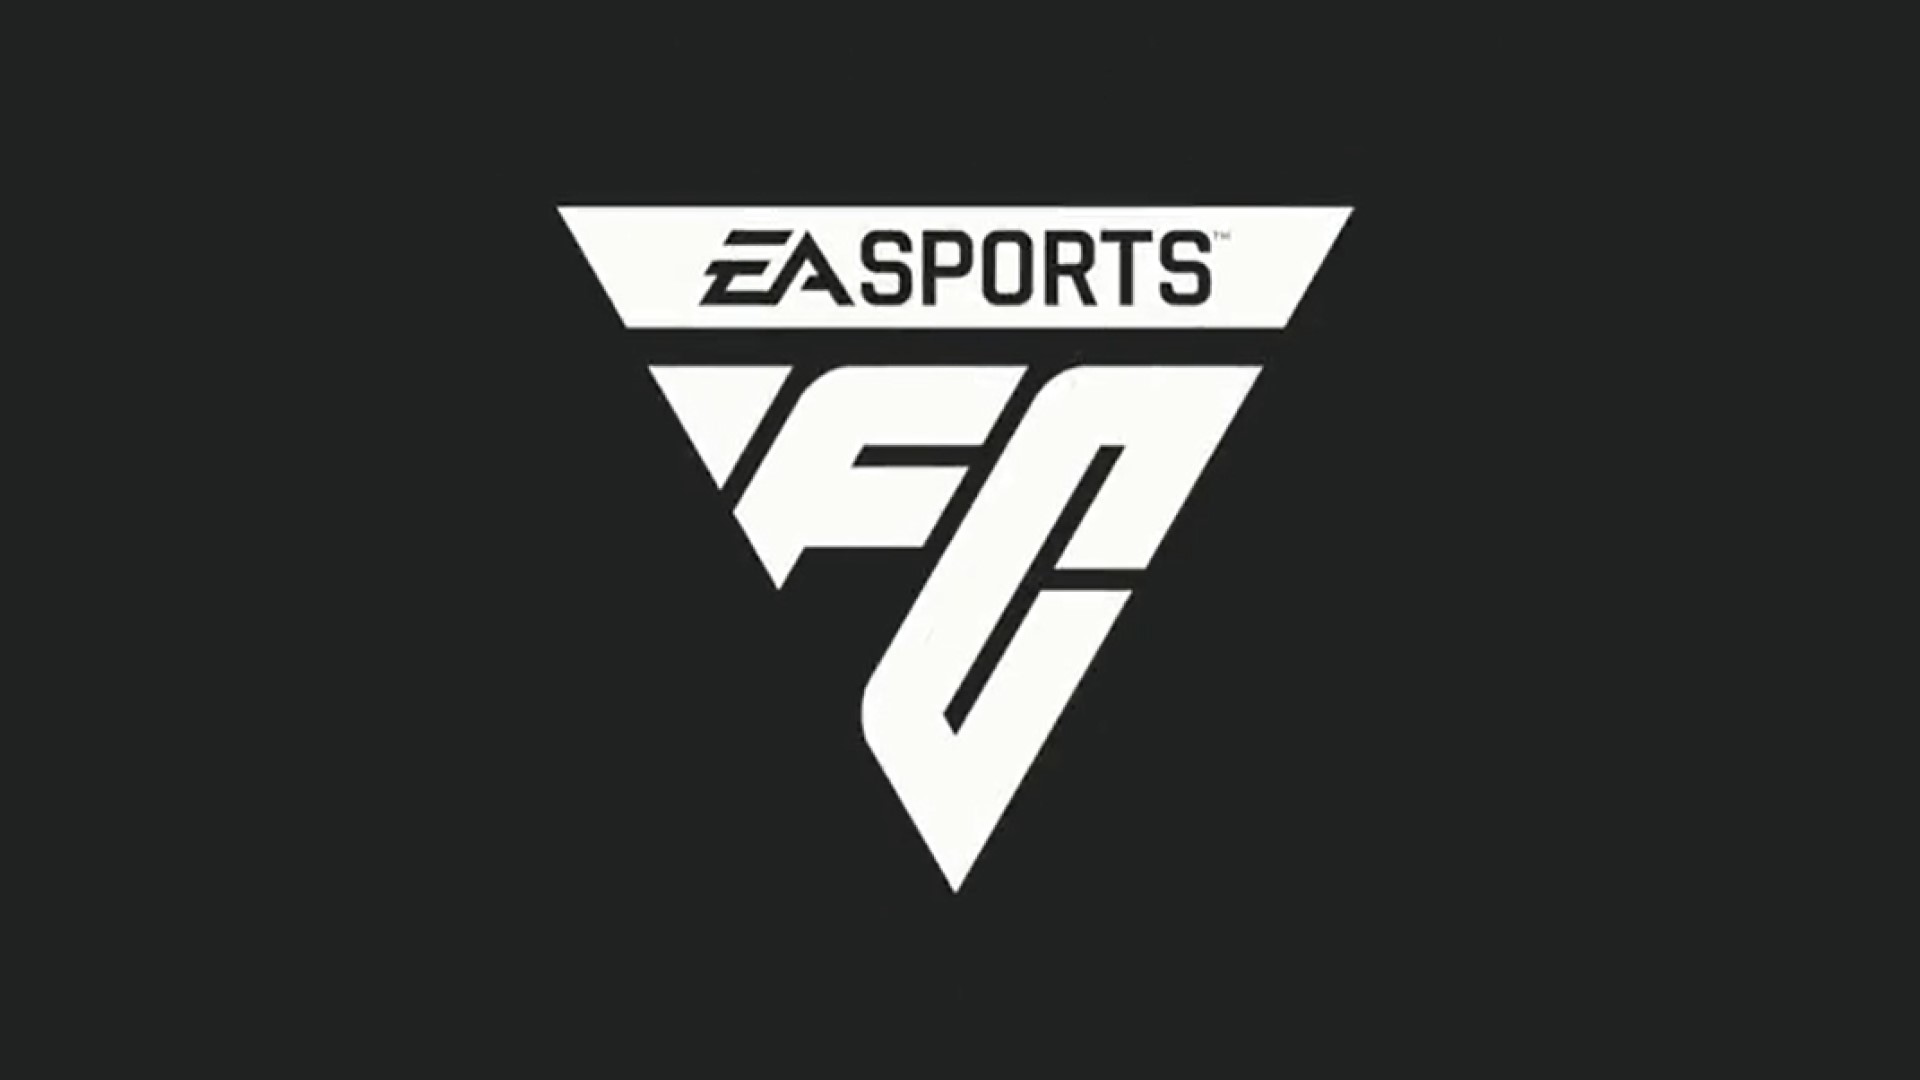 What is included in the EA SPORTS FC 24 Ultimate Edition